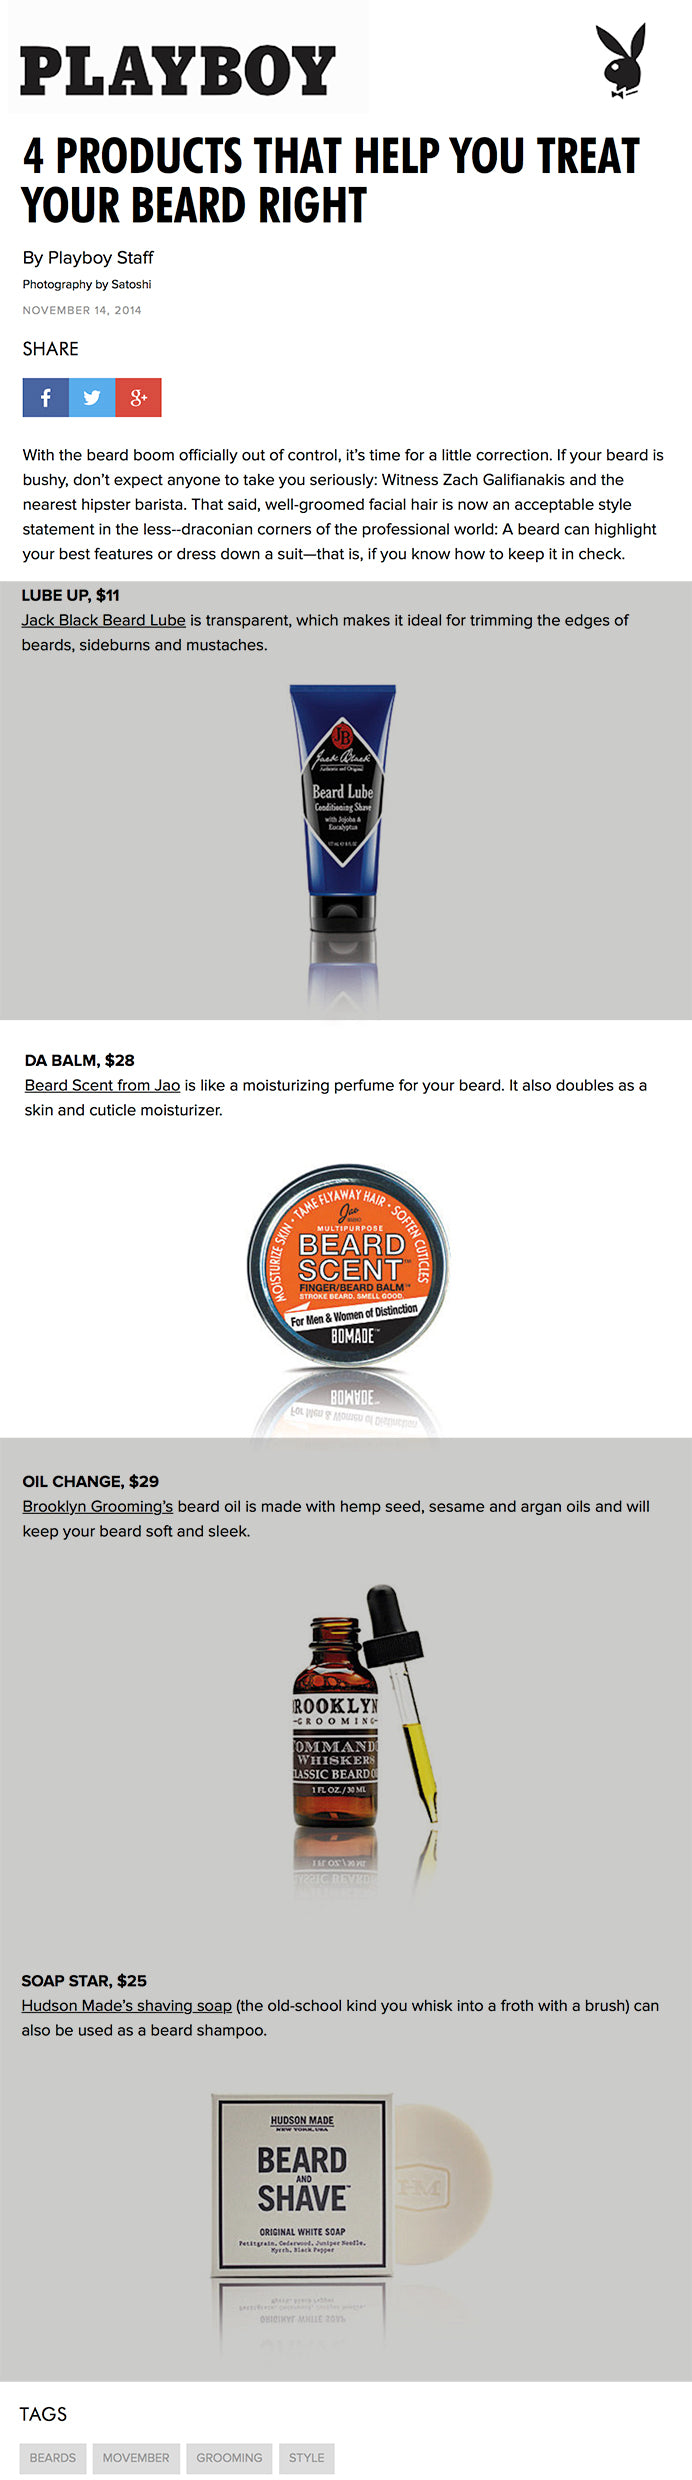 Playboy Recommends BeardScent!